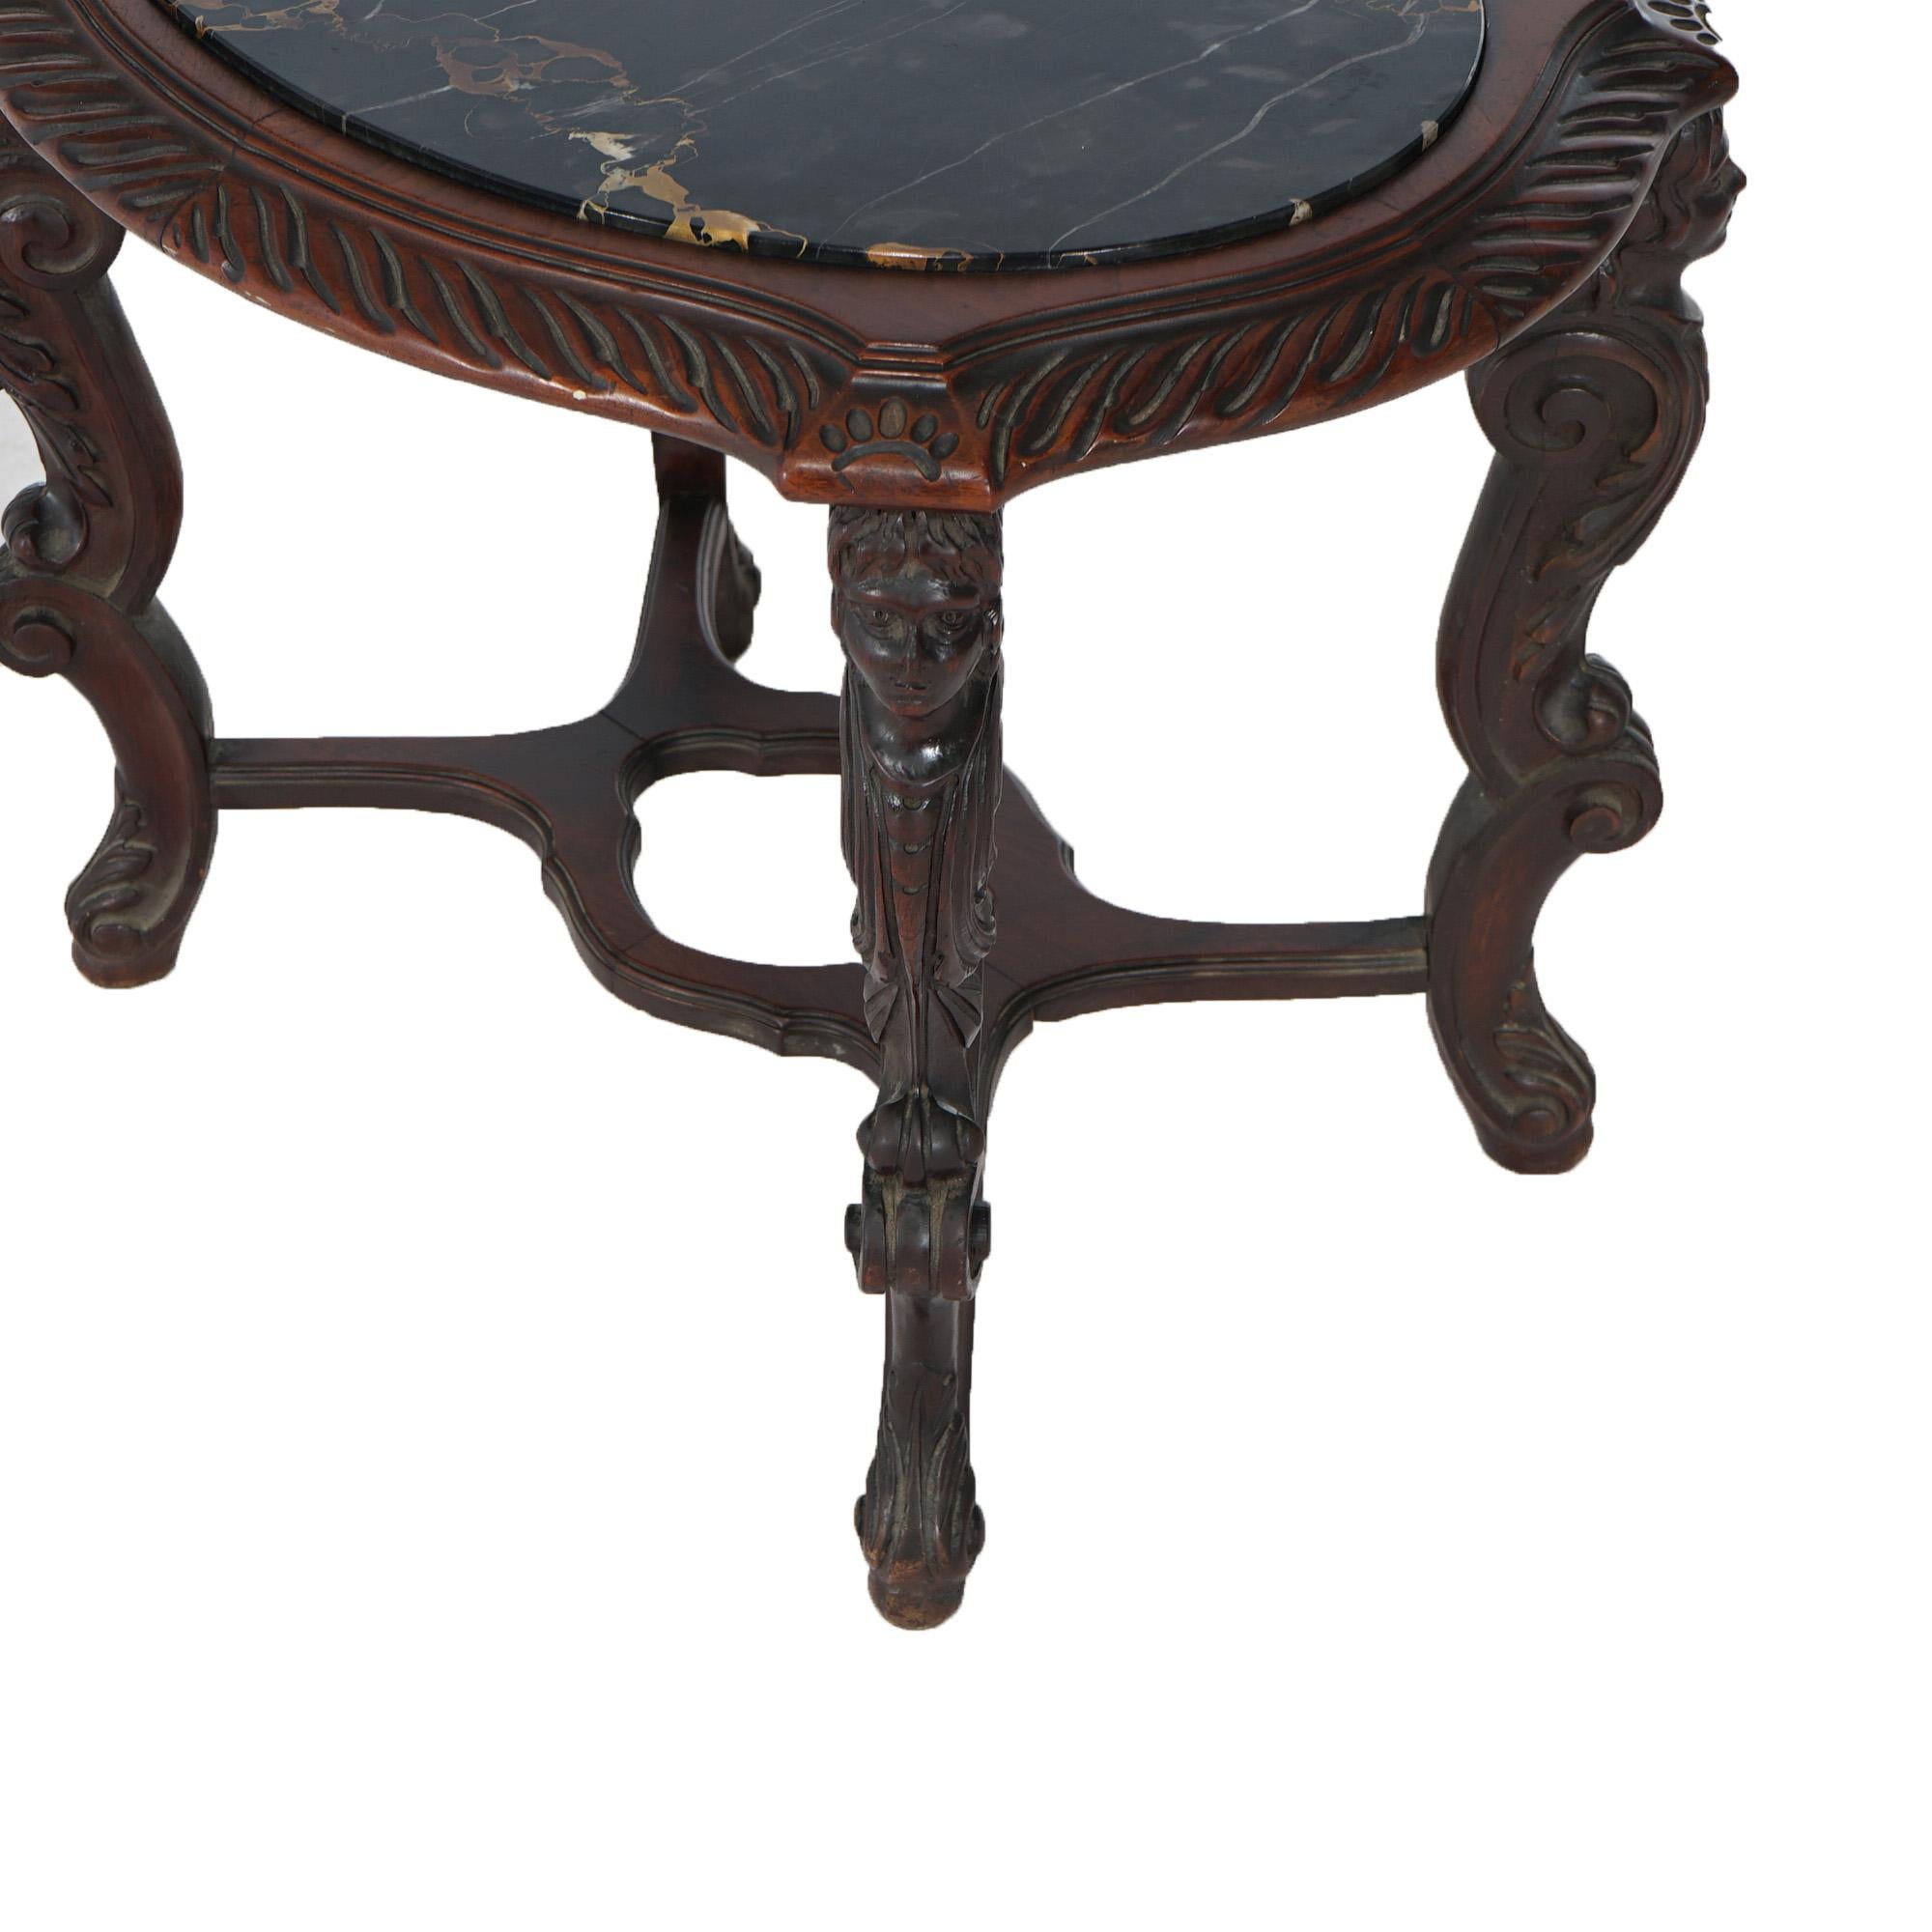 19th Century Antique Italian Renaissance Figural Carved Walnut & Marble Side Table c1910